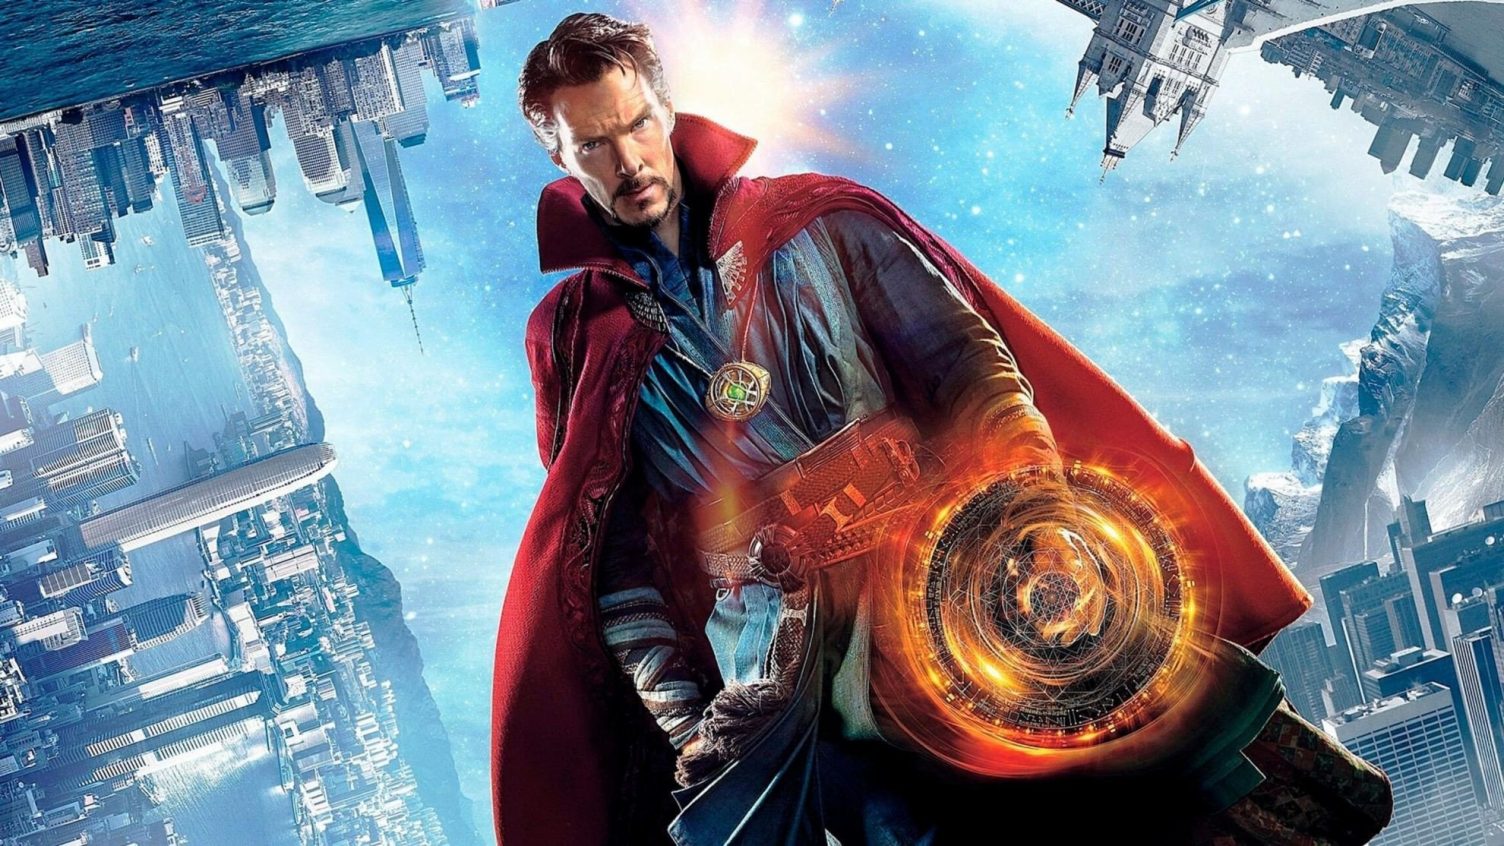 Saudia Arabia Banned Doctor Strange in the Multiverse of Madness